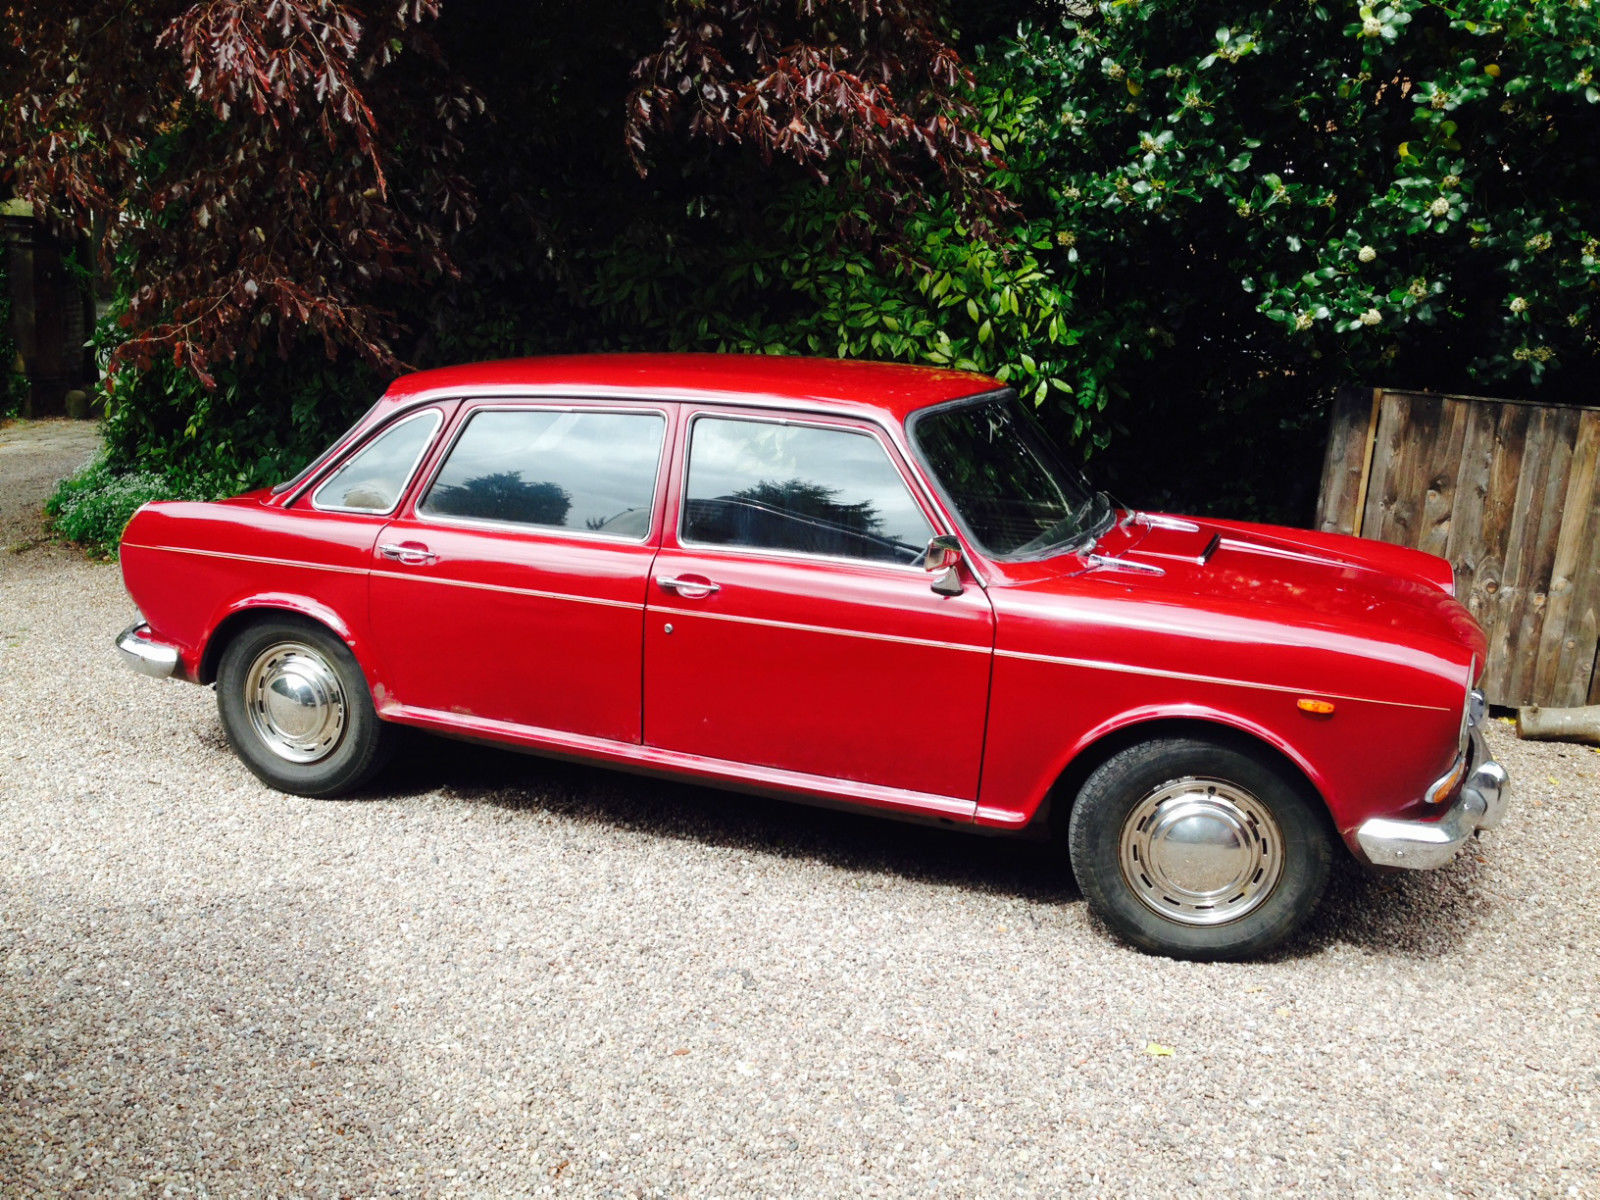 Classic (old, retro) cars for sale £0-5k - Page 170 - General Gassing - PistonHeads